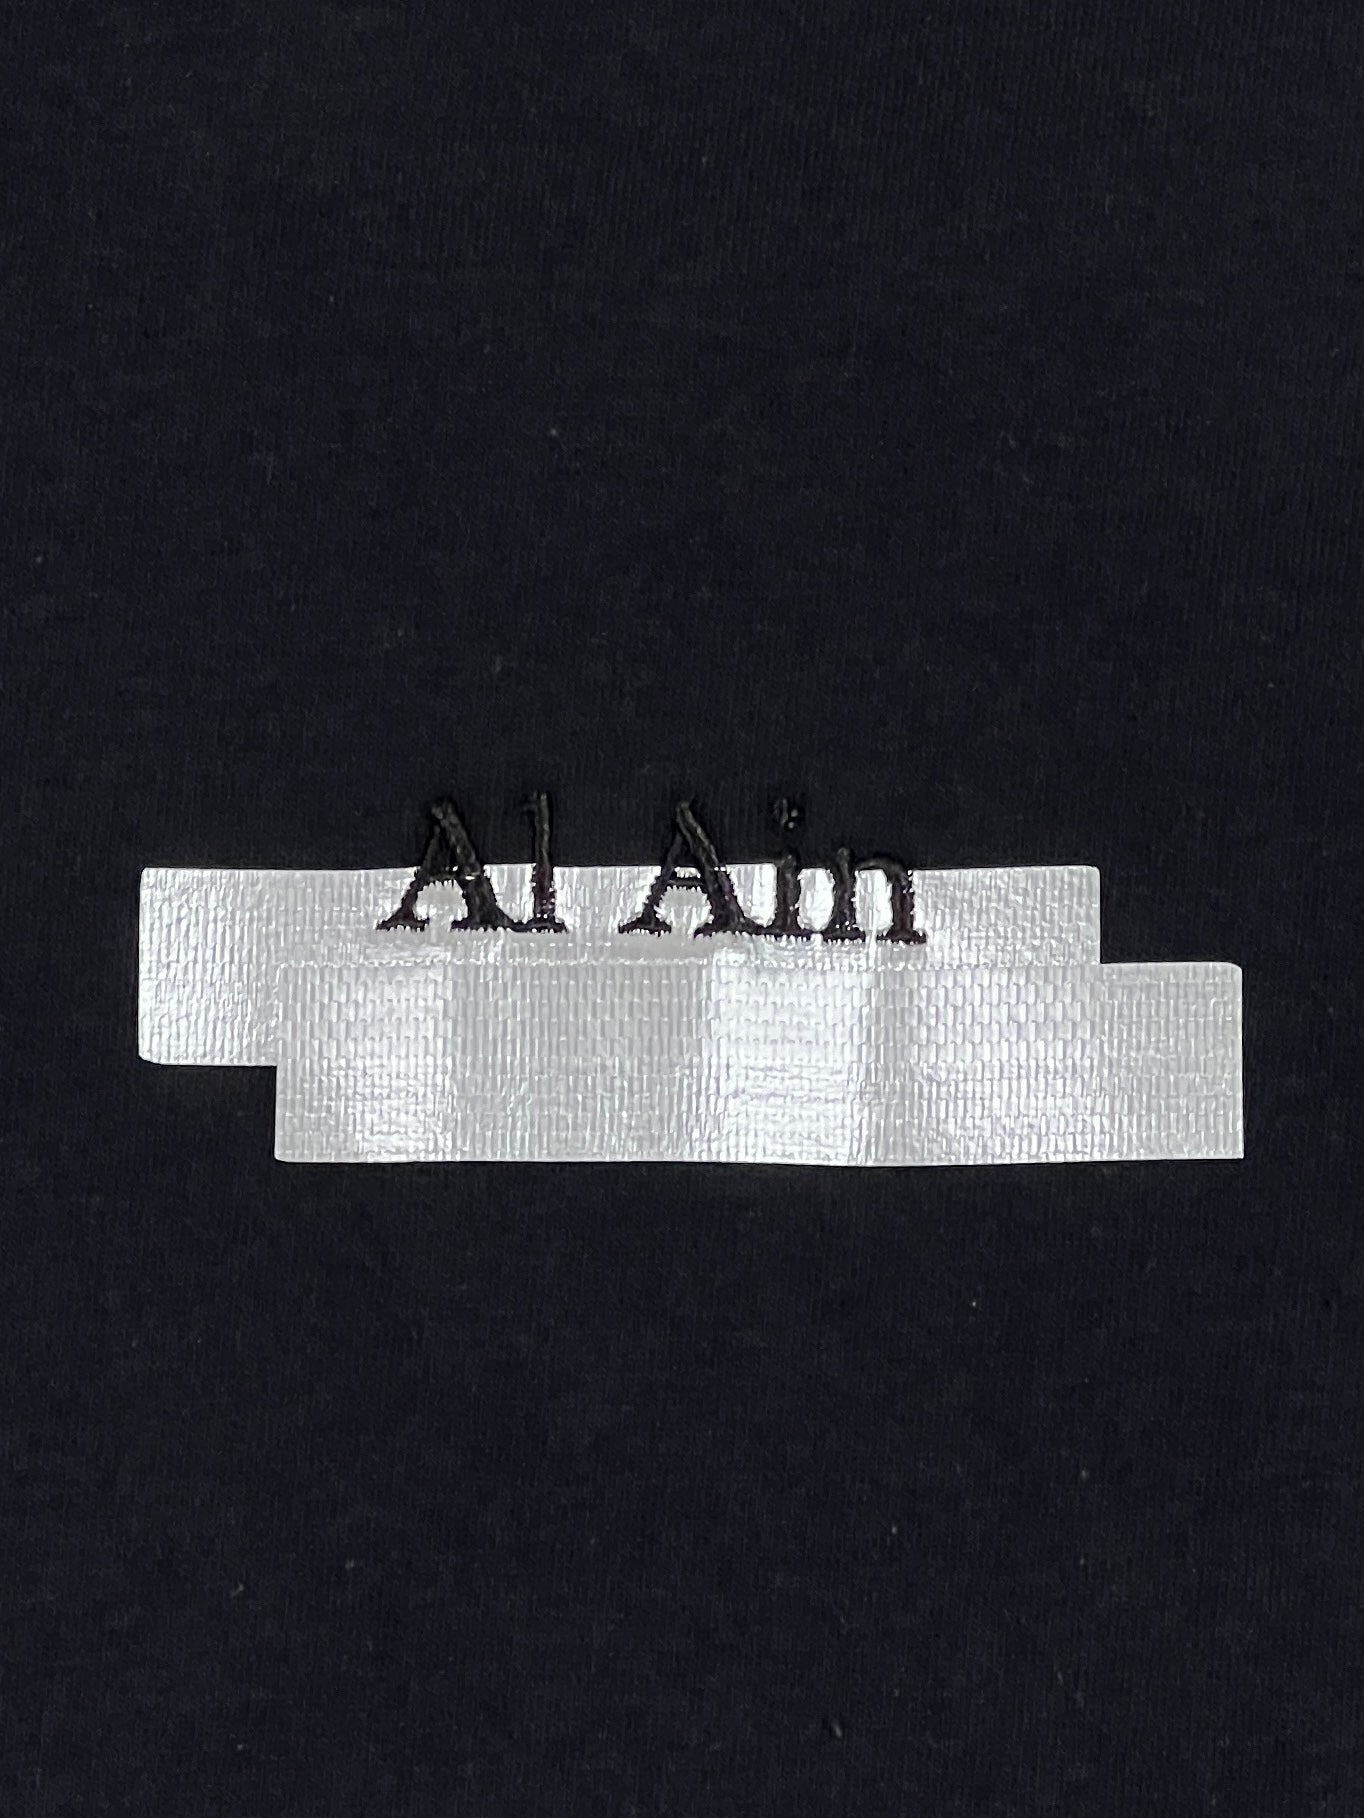 A piece of black fabric with the word "AL AIN AMHX S124 CHILL NOIR" embroidered in black thread, partially covered by horizontal strips of silver ribbon—creating a stylish and eye-catching design reminiscent of a graphic t-shirt.